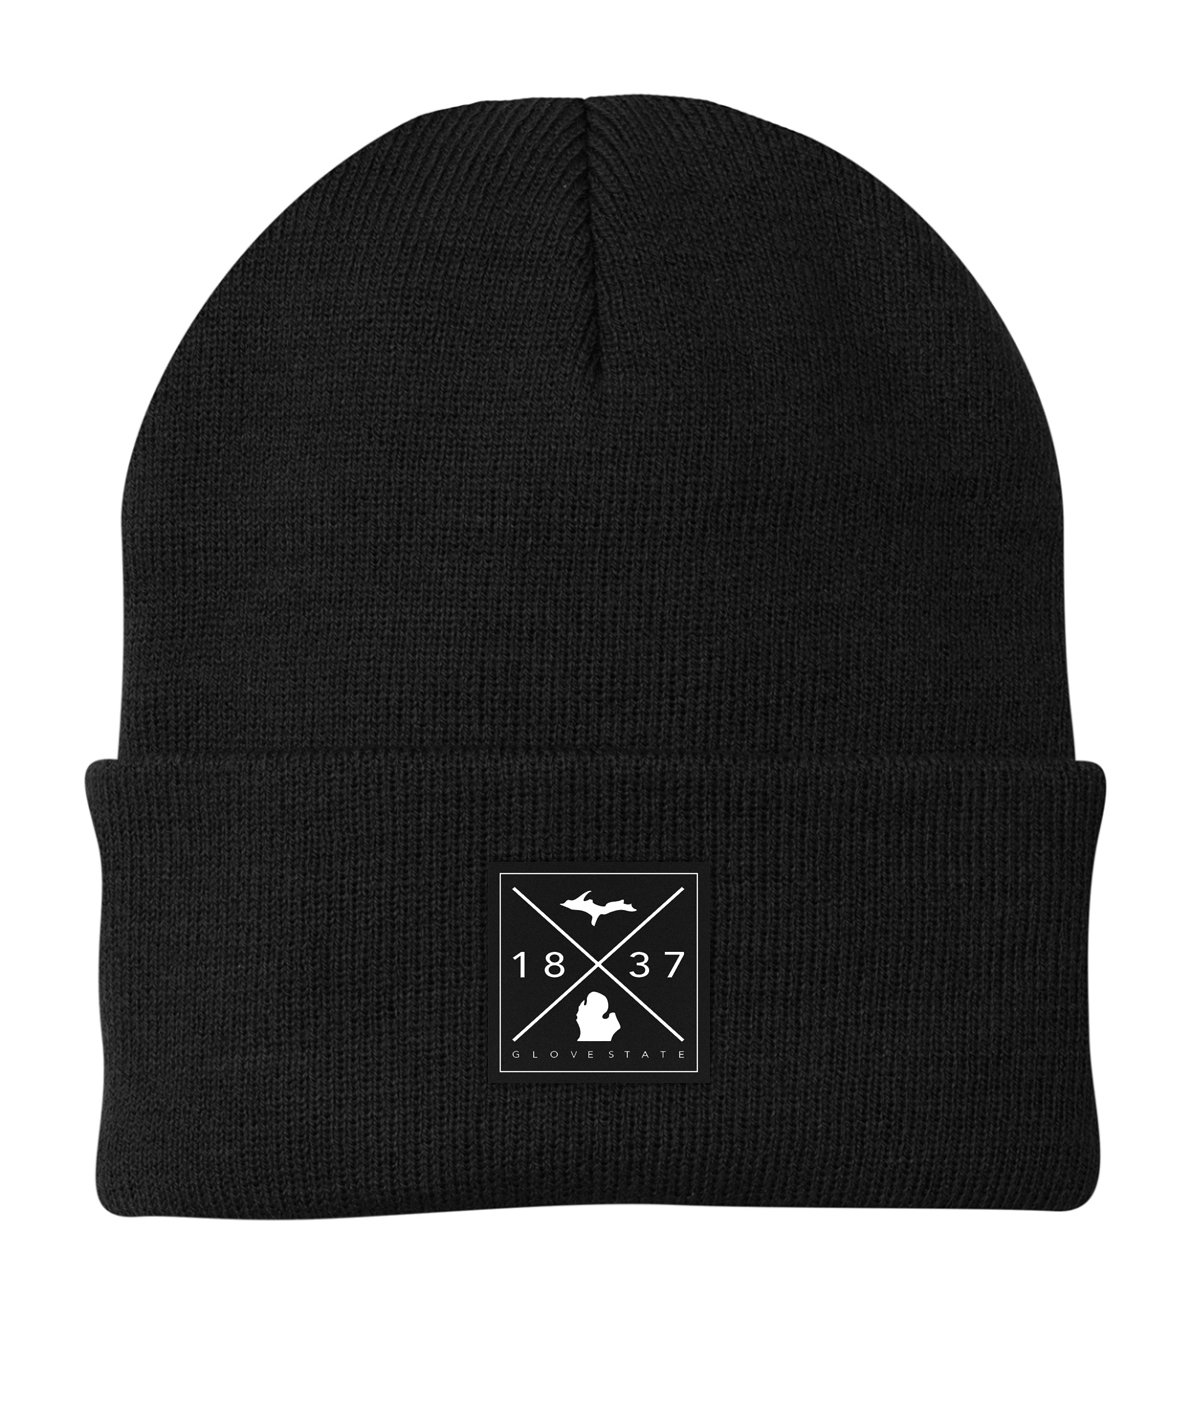 Image of 1837 Patch Beanie